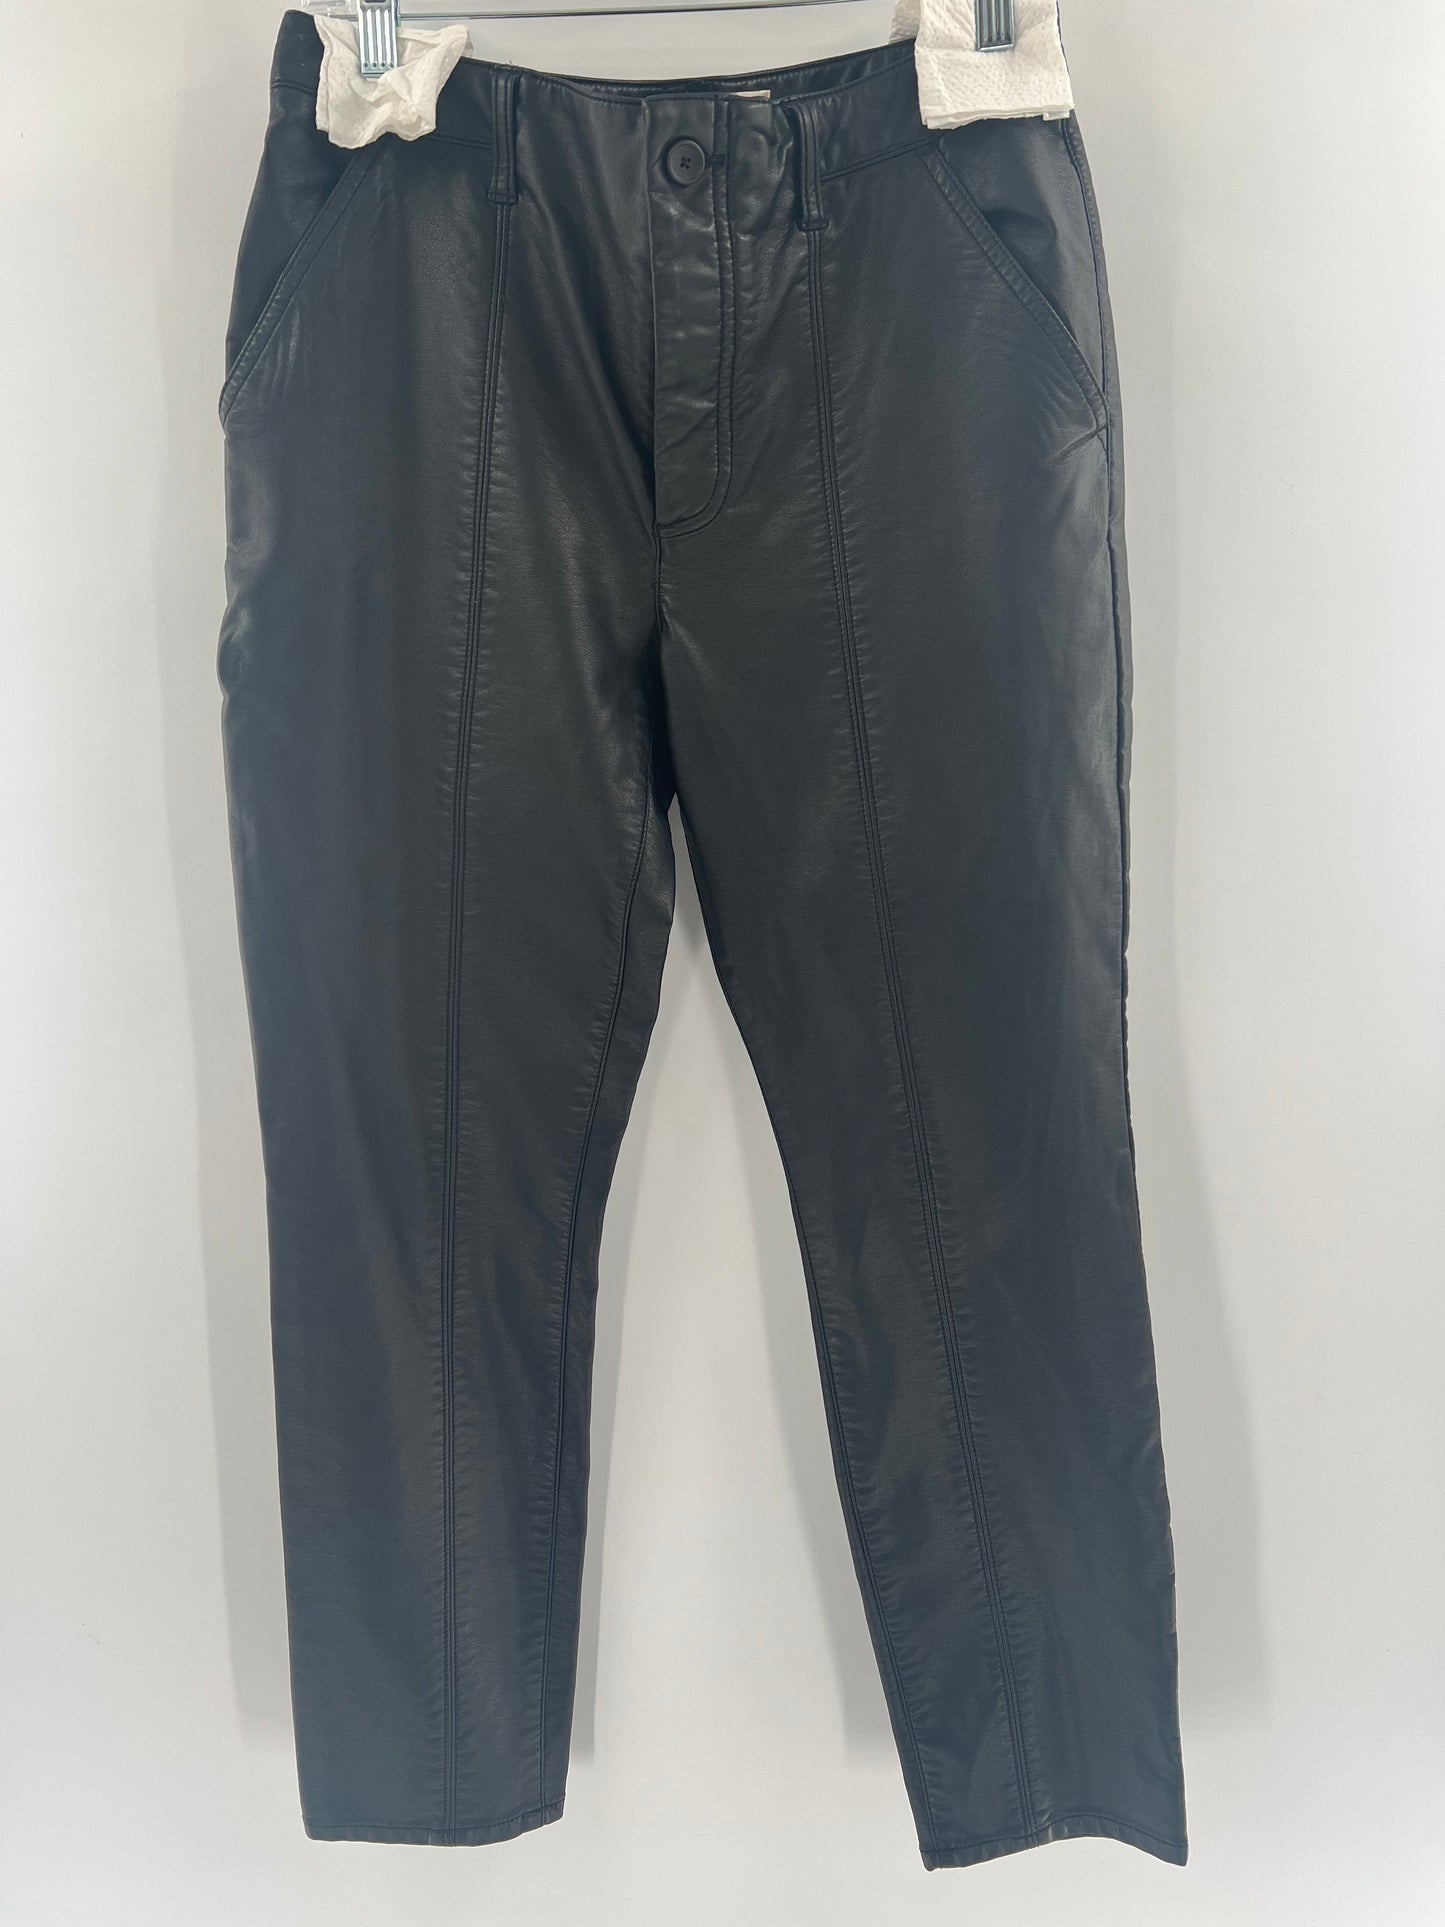 Free People Black Faux Leather Regular Button Up Pants (Size 29)